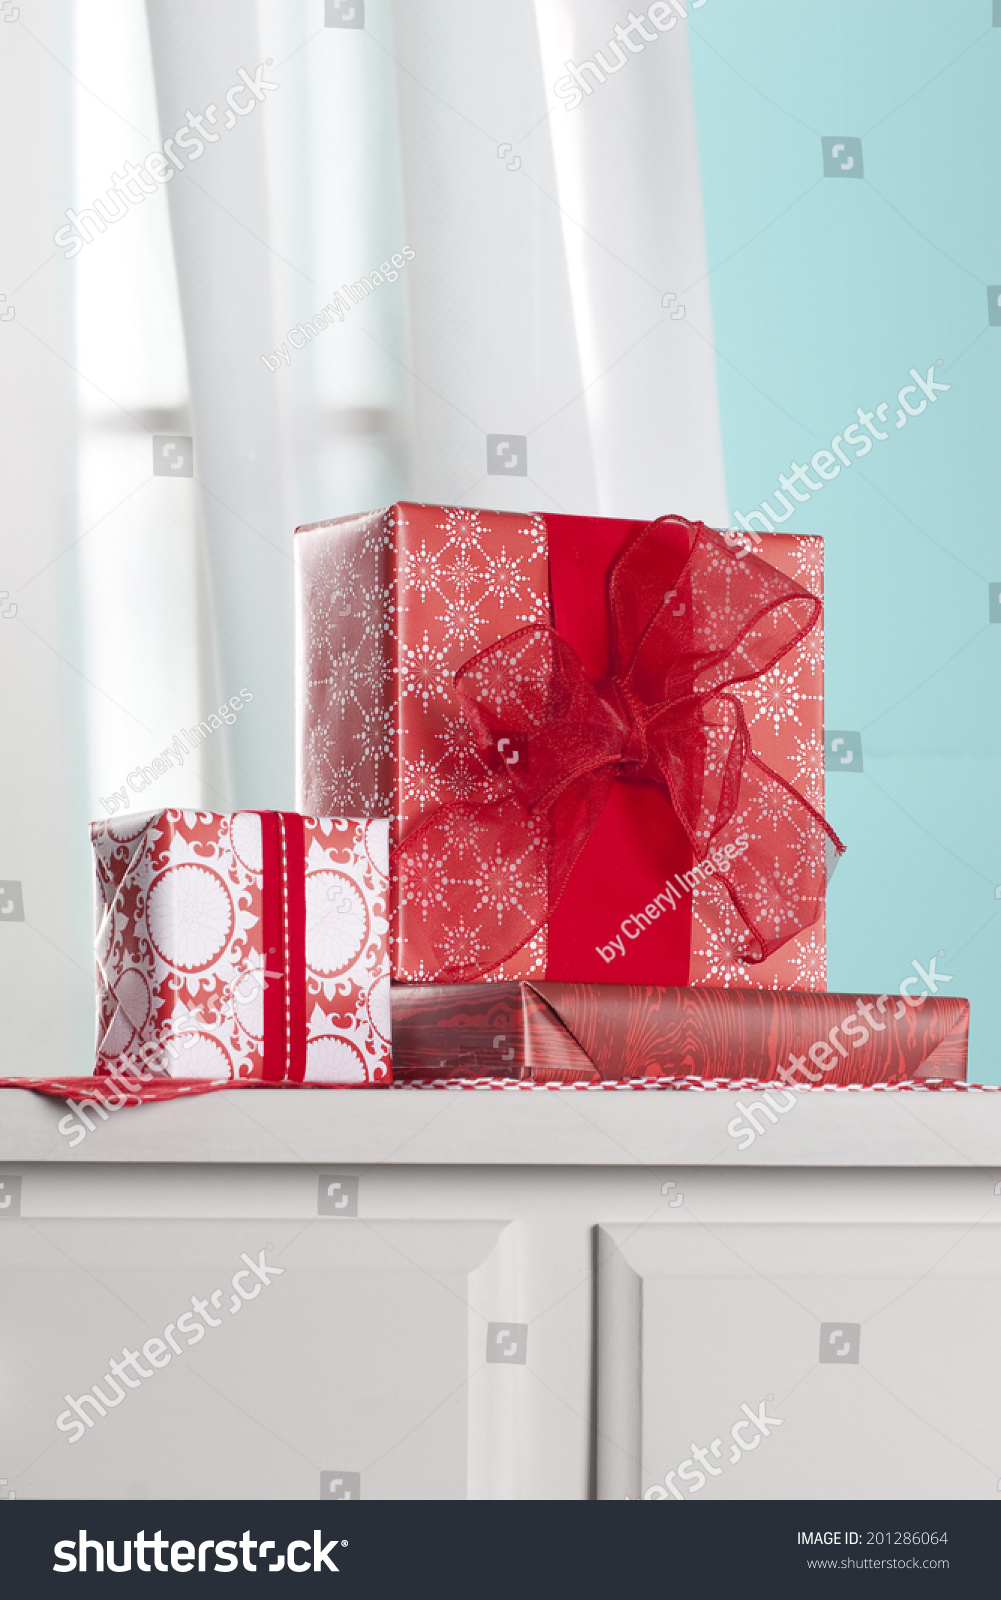 Presents On Dresser Front Window Inside Holidays Objects Stock